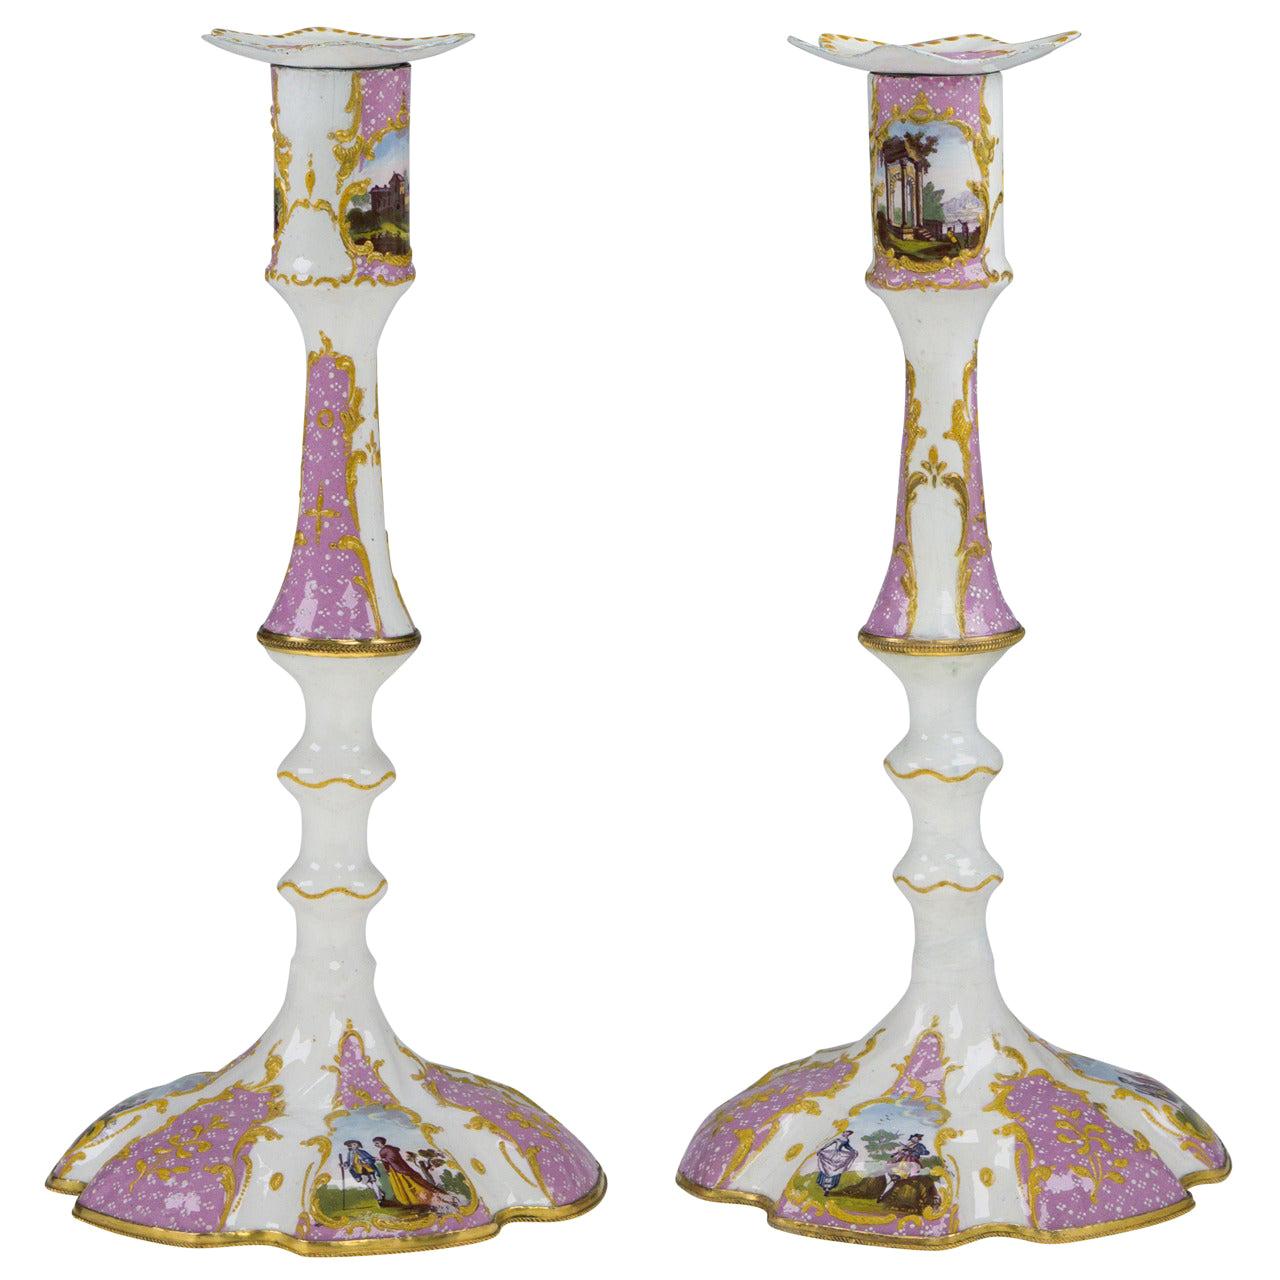 Pair of English Enamel Candlesticks with Rococo Scenes on Pink Ground, 1780 For Sale